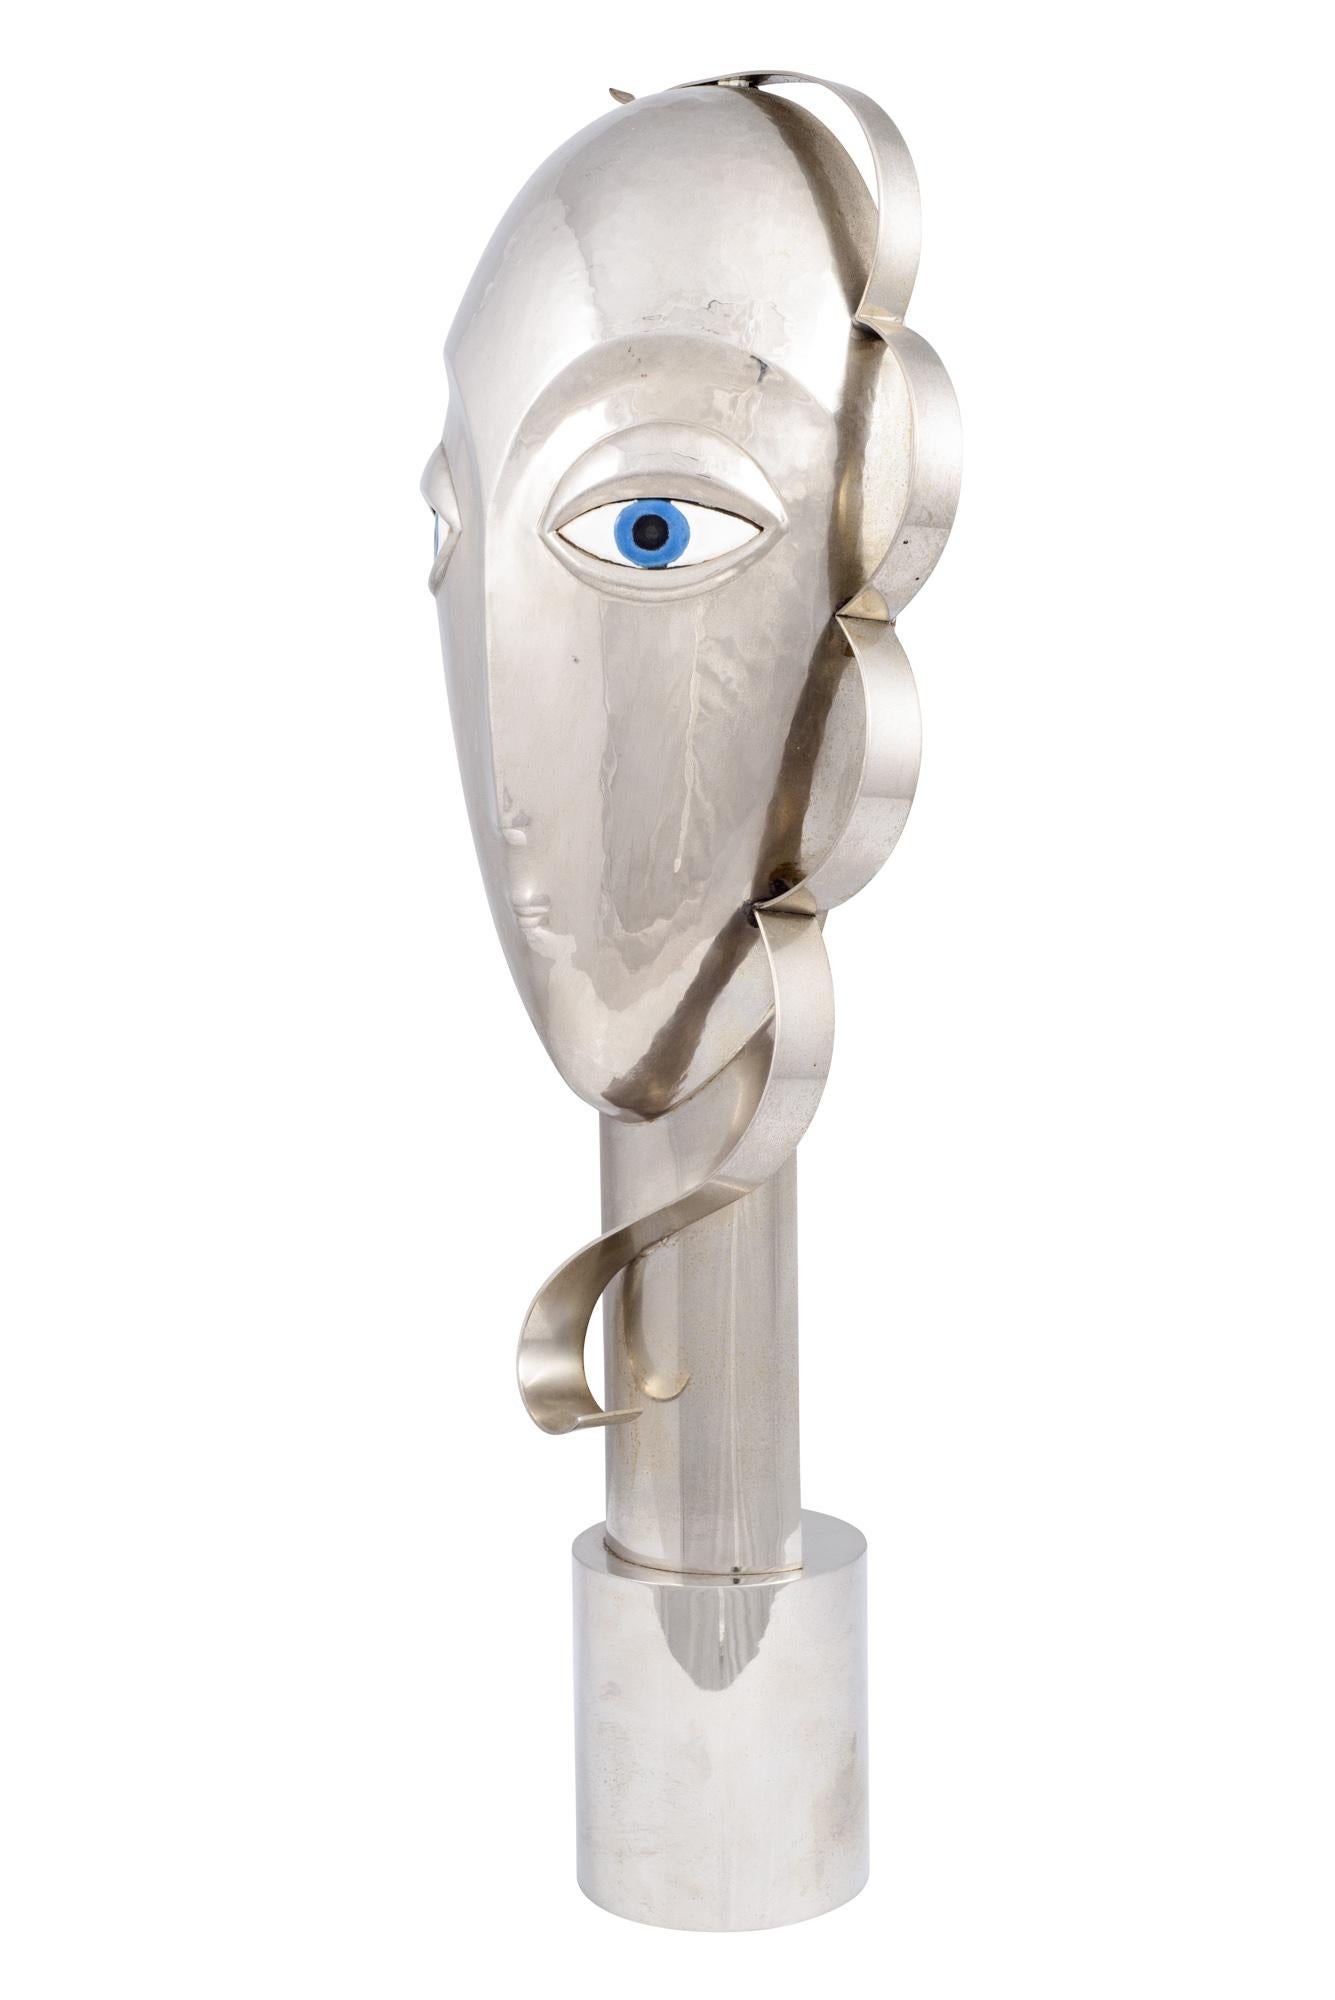 Female sculpture Franz Hagenauer Austrian Art Deco Nickel-Plated Brass 1970s

Until 1925 Franz Hagenauer attended the sculpture class of Professor Anton Hanak at the Vienna School of Arts and Crafts, who attested him 